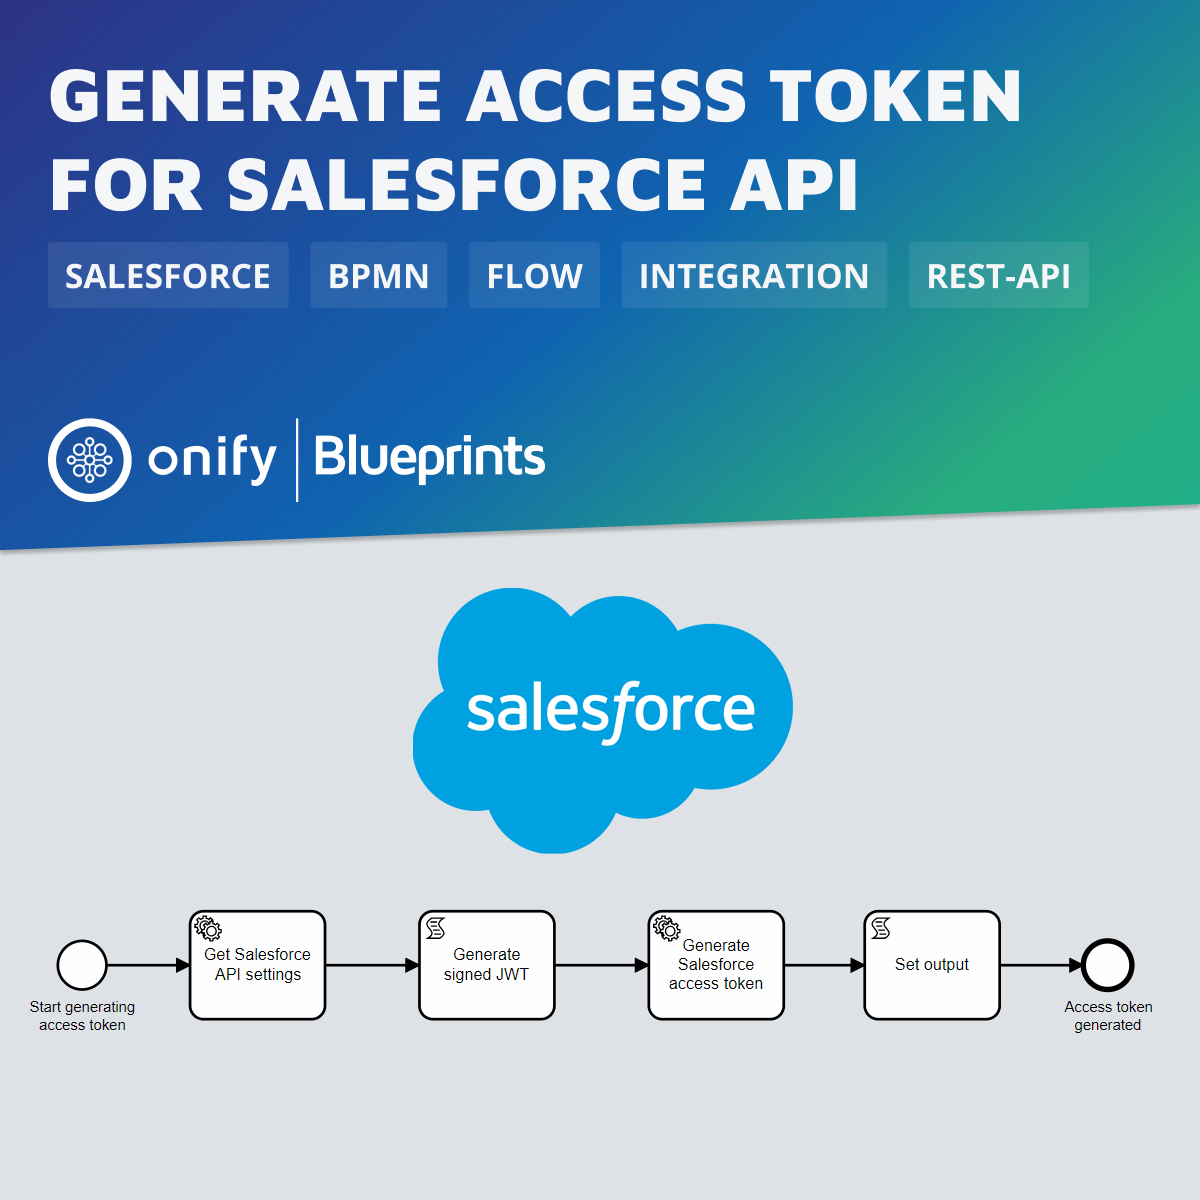 Onify Blueprint: Generate access token for Salesforce API